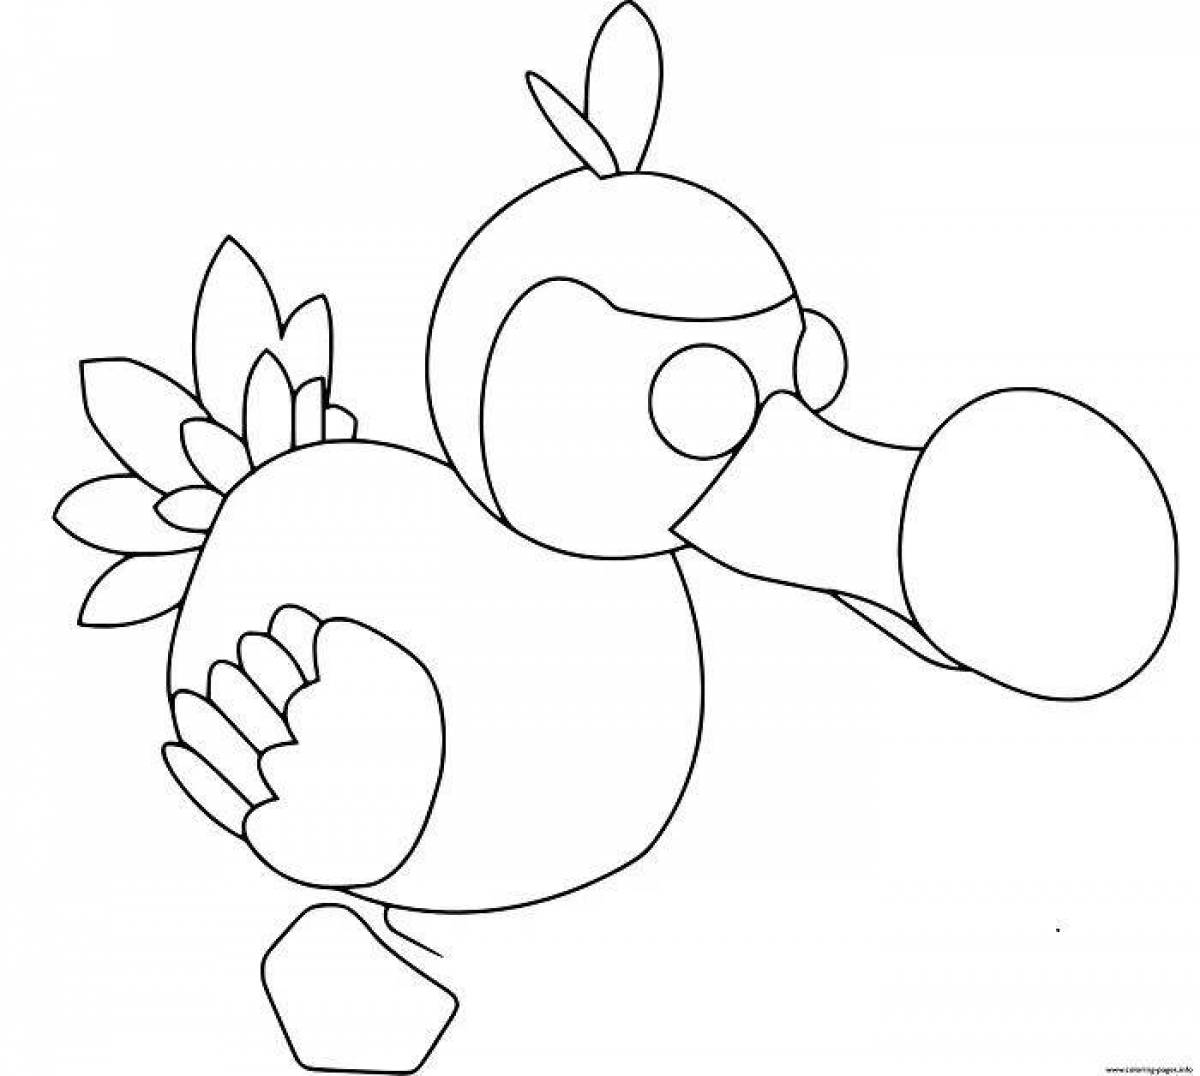 Radiant adot me coloring page